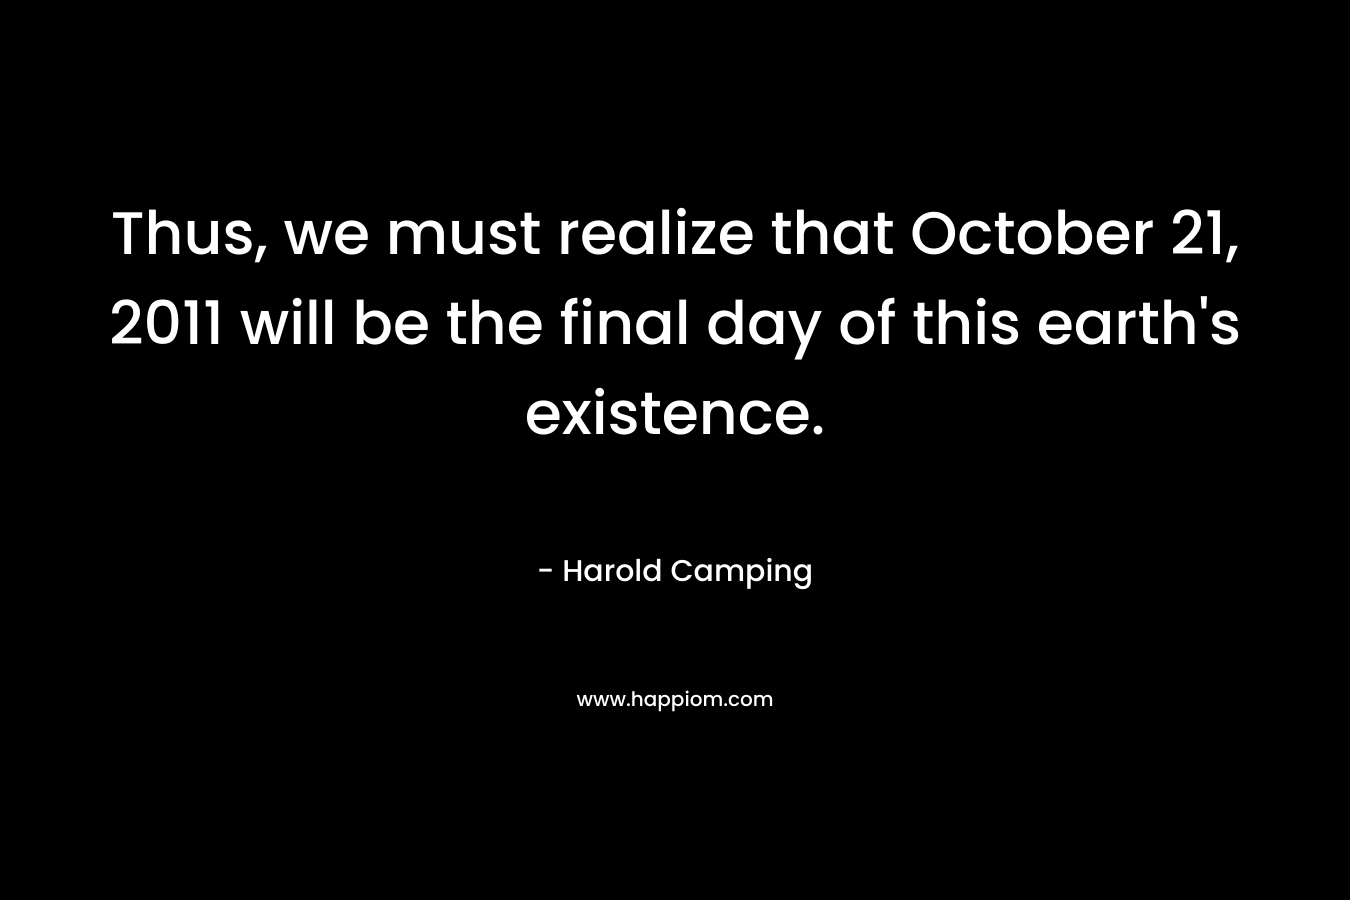 Thus, we must realize that October 21, 2011 will be the final day of this earth's existence.